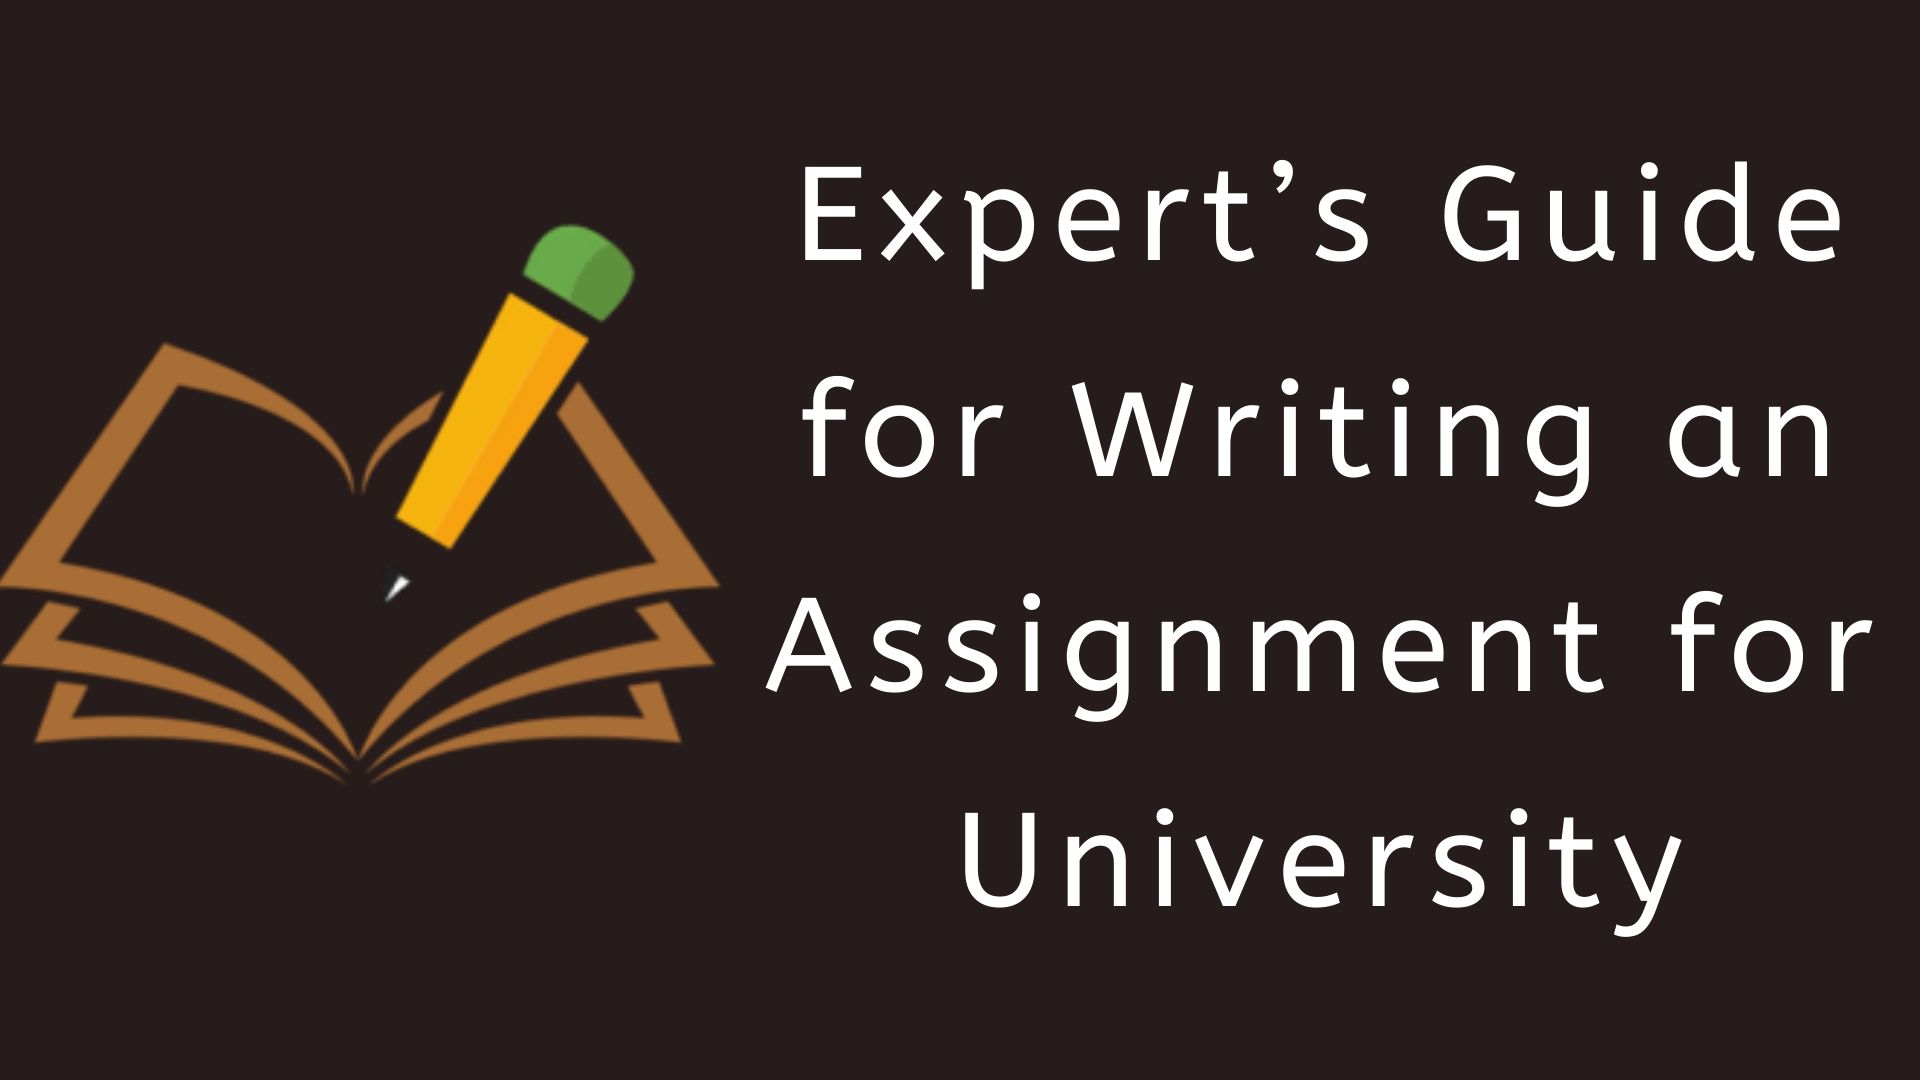 An Expert Guide for Writing an Assignment for University